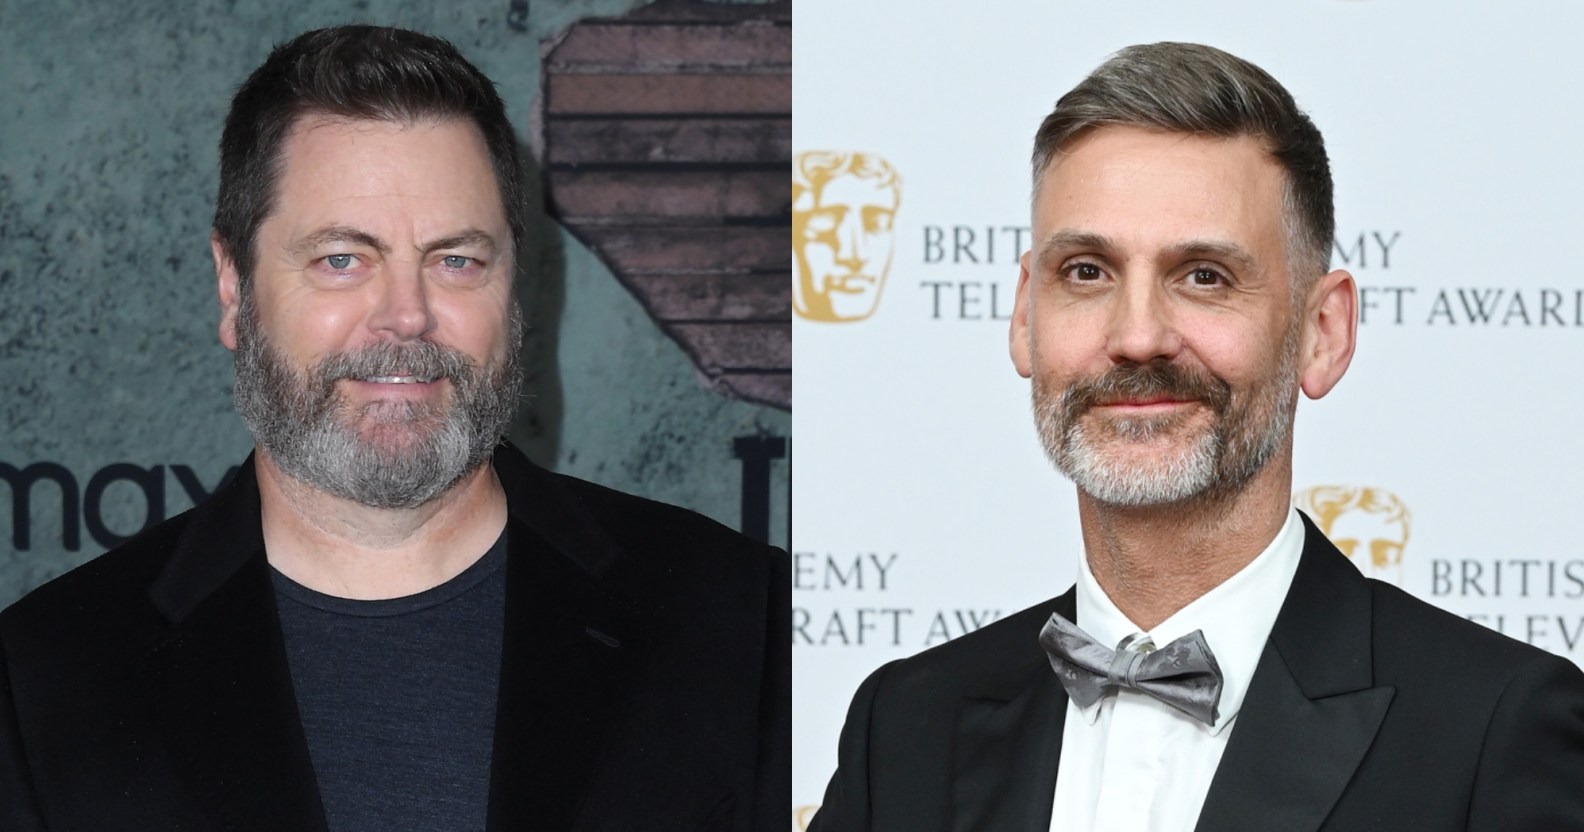 Nick Offerman L And The Last Of Us Director Peter Hoar R. Getty